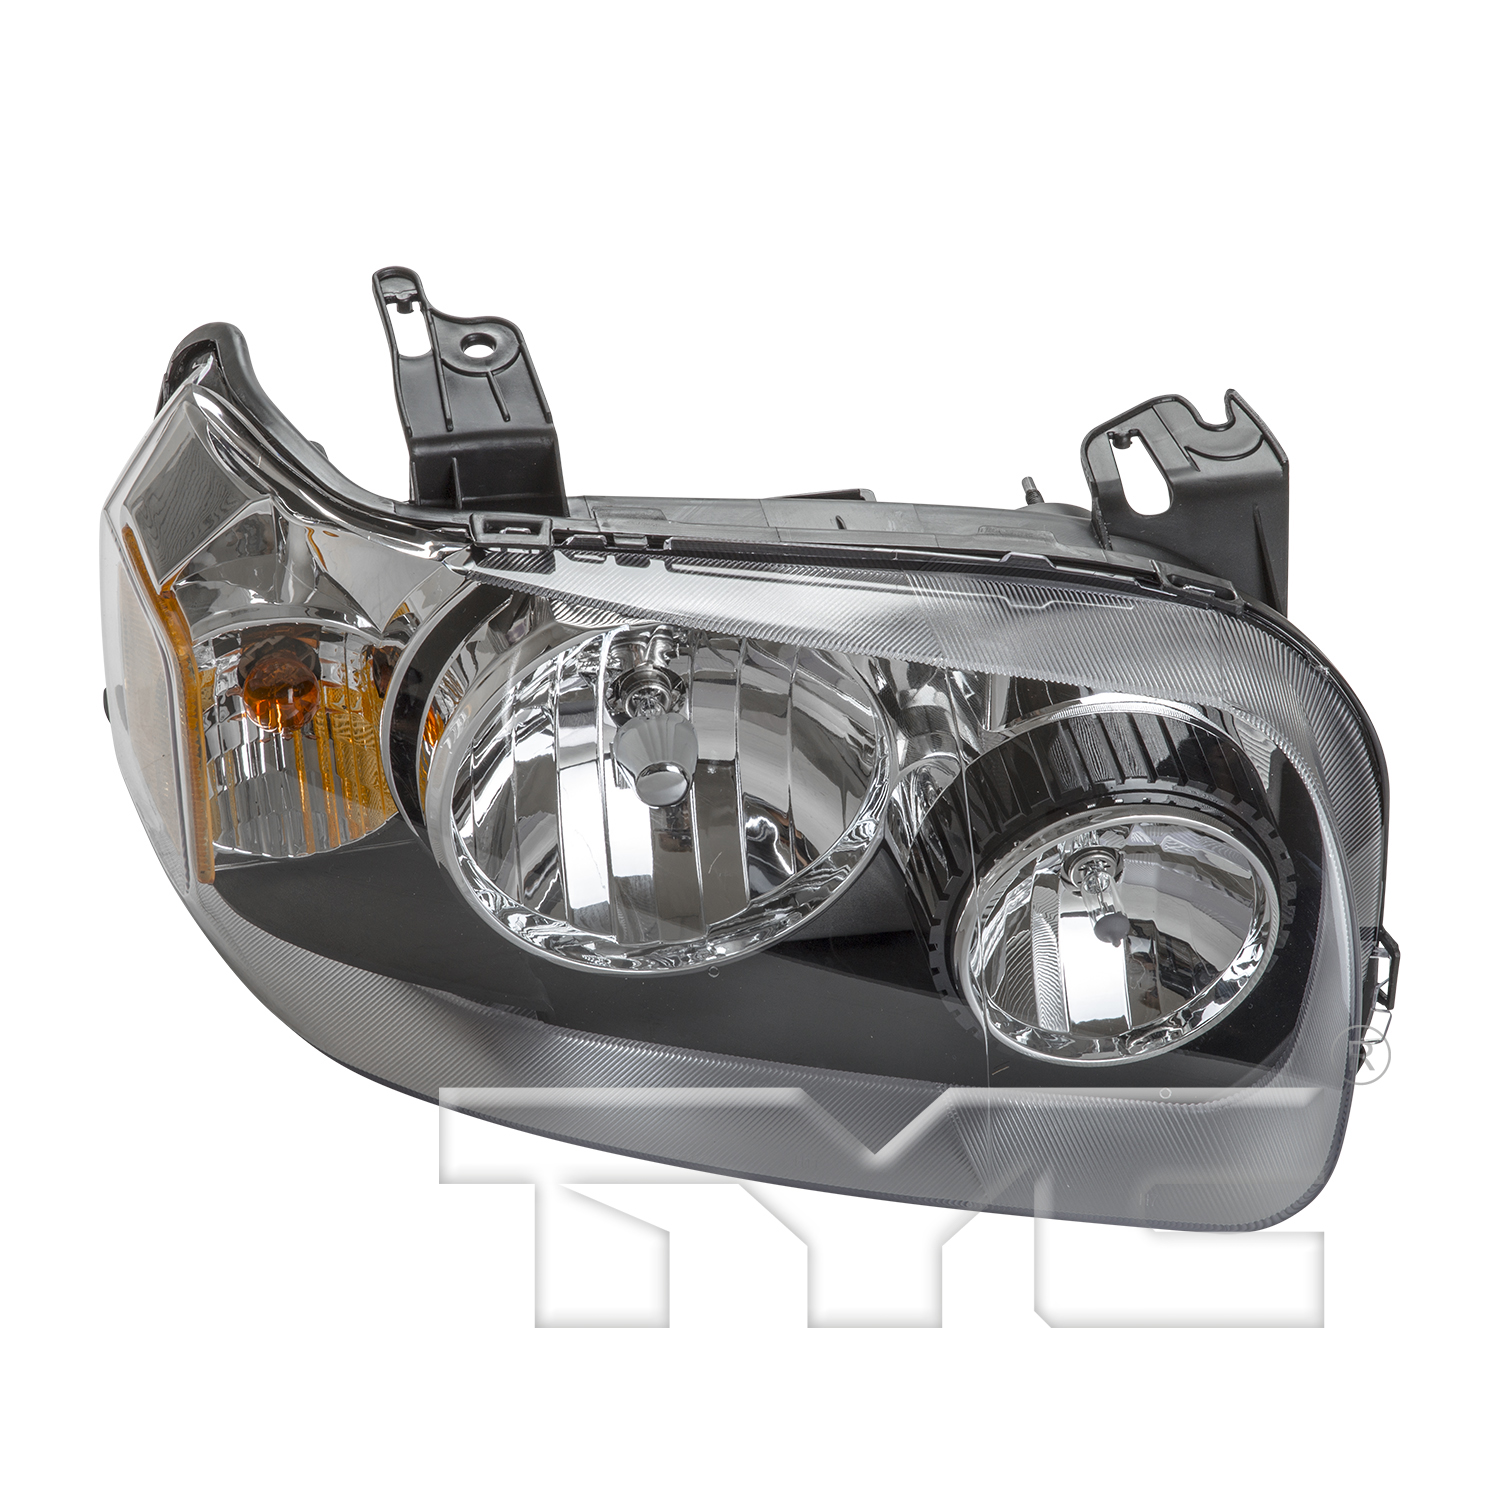 Aftermarket HEADLIGHTS for FORD - ESCAPE, ESCAPE,05-07,RT Headlamp lens/housing